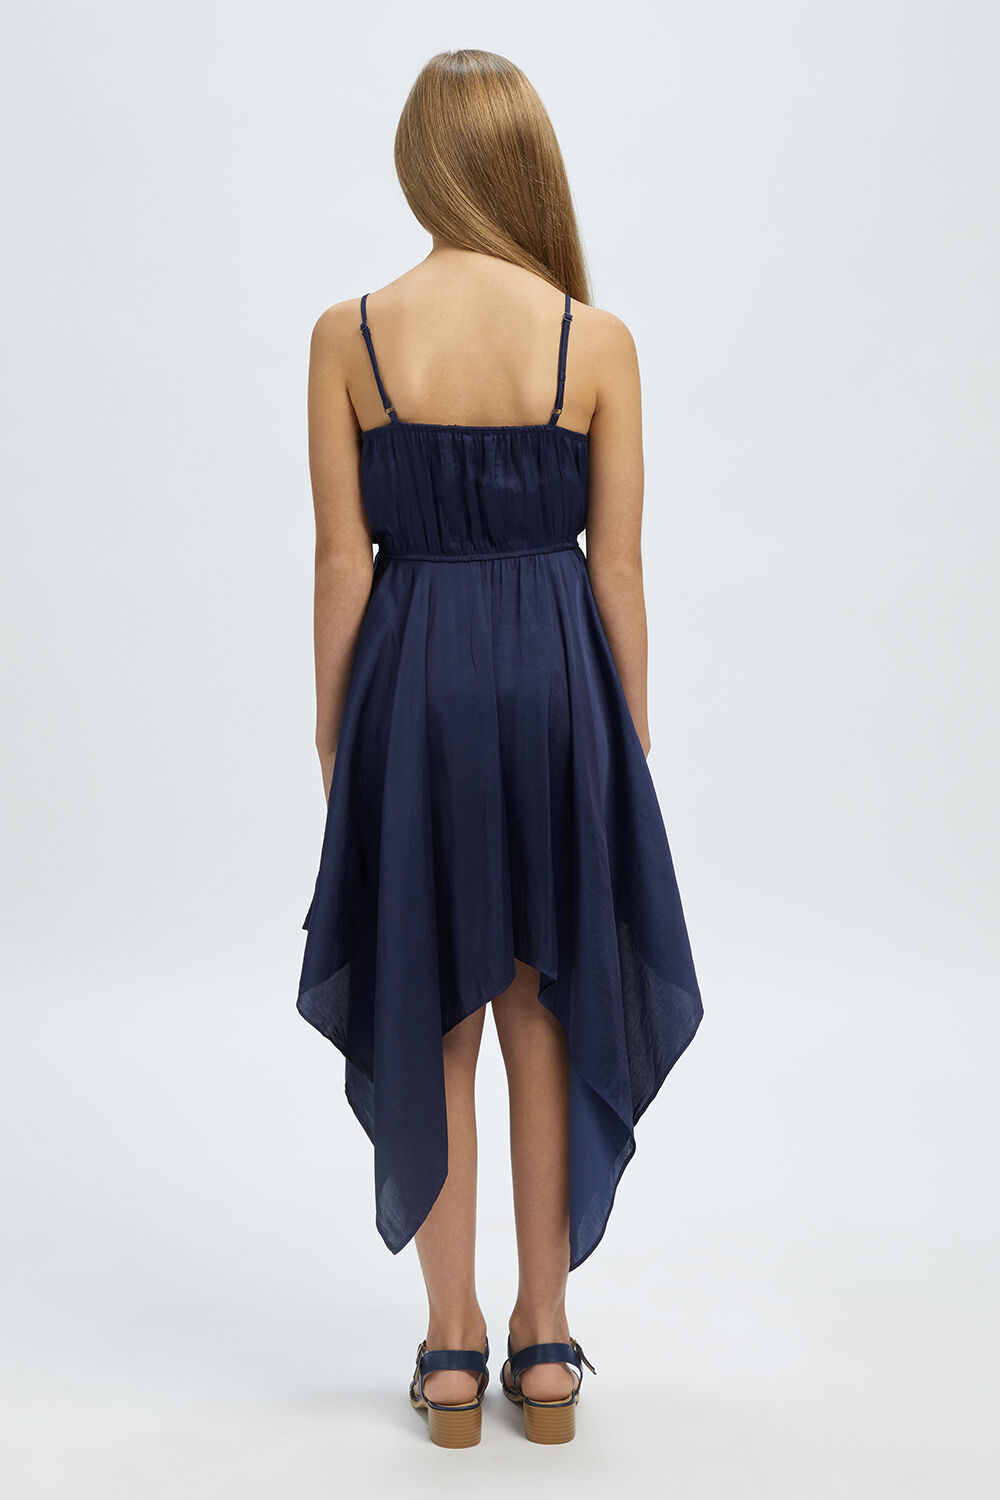 ADDY HANKY DRESS in colour MARITIME BLUE